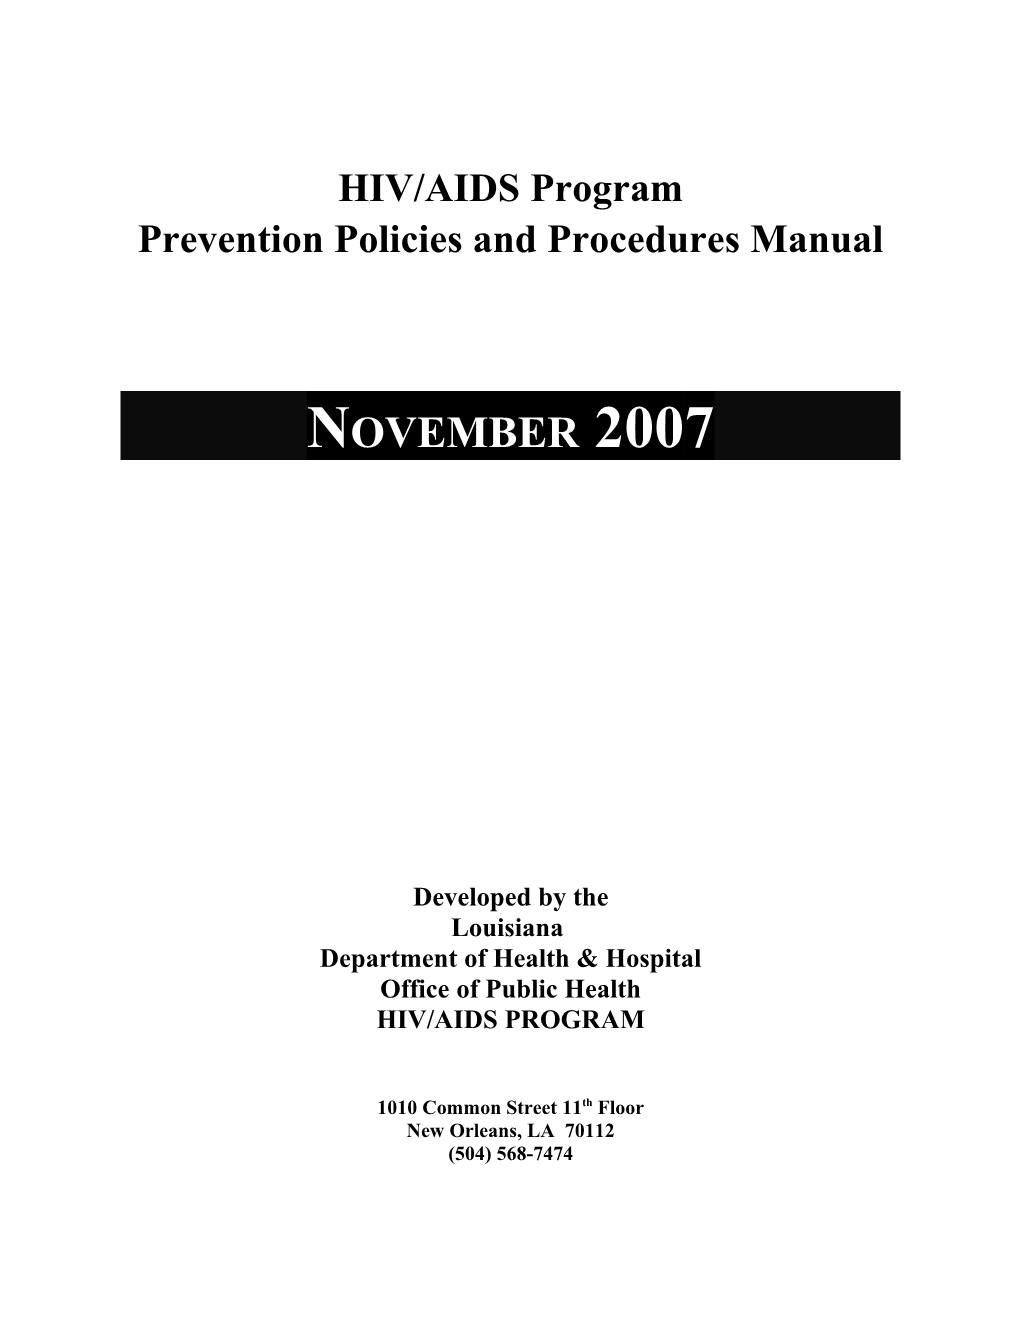 Prevention Policies and Procedures Manual